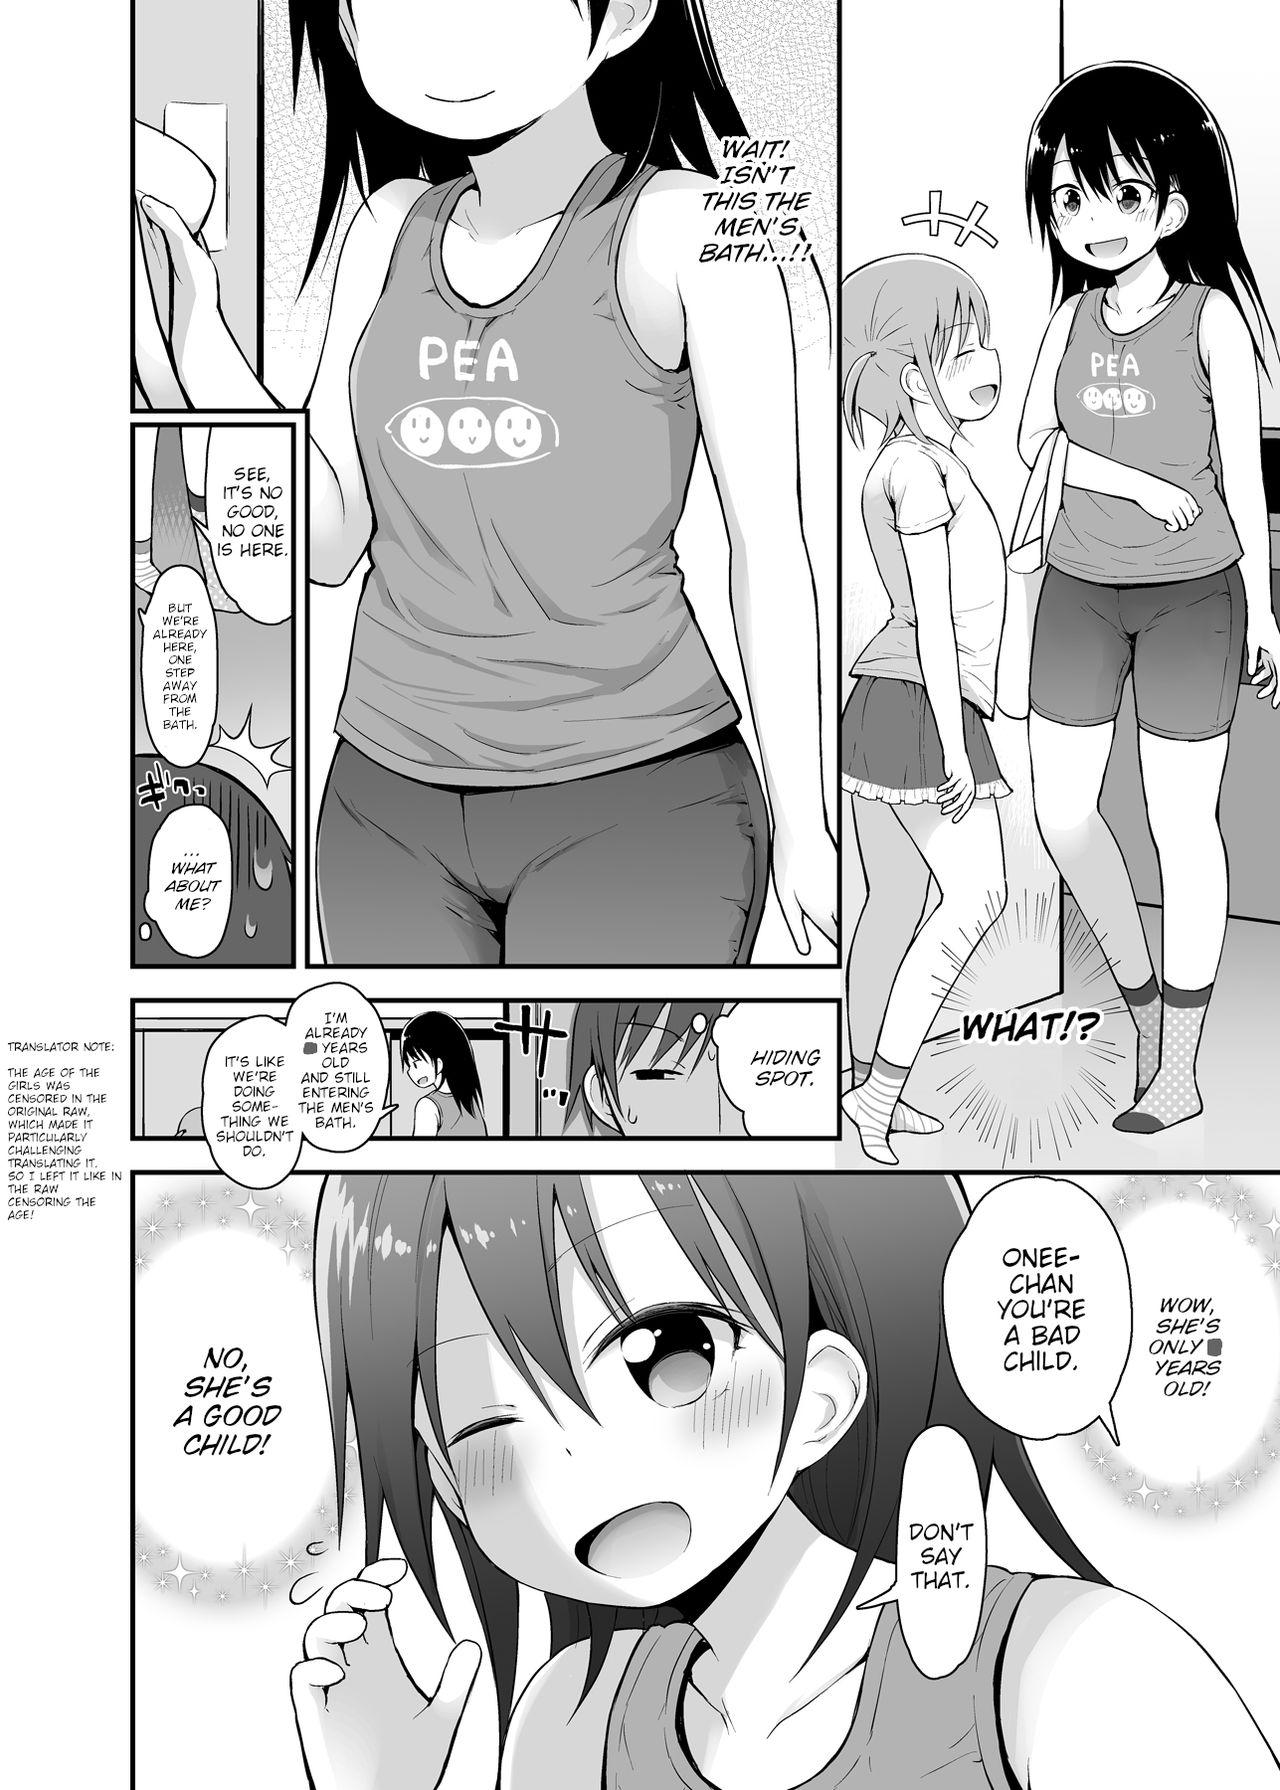 Sexteen Onnanoko datte Otokoyu ni Hairitai 3 | They may just be little girls, but they still want to enter the men's bath! 3 - Original Gay Friend - Page 3